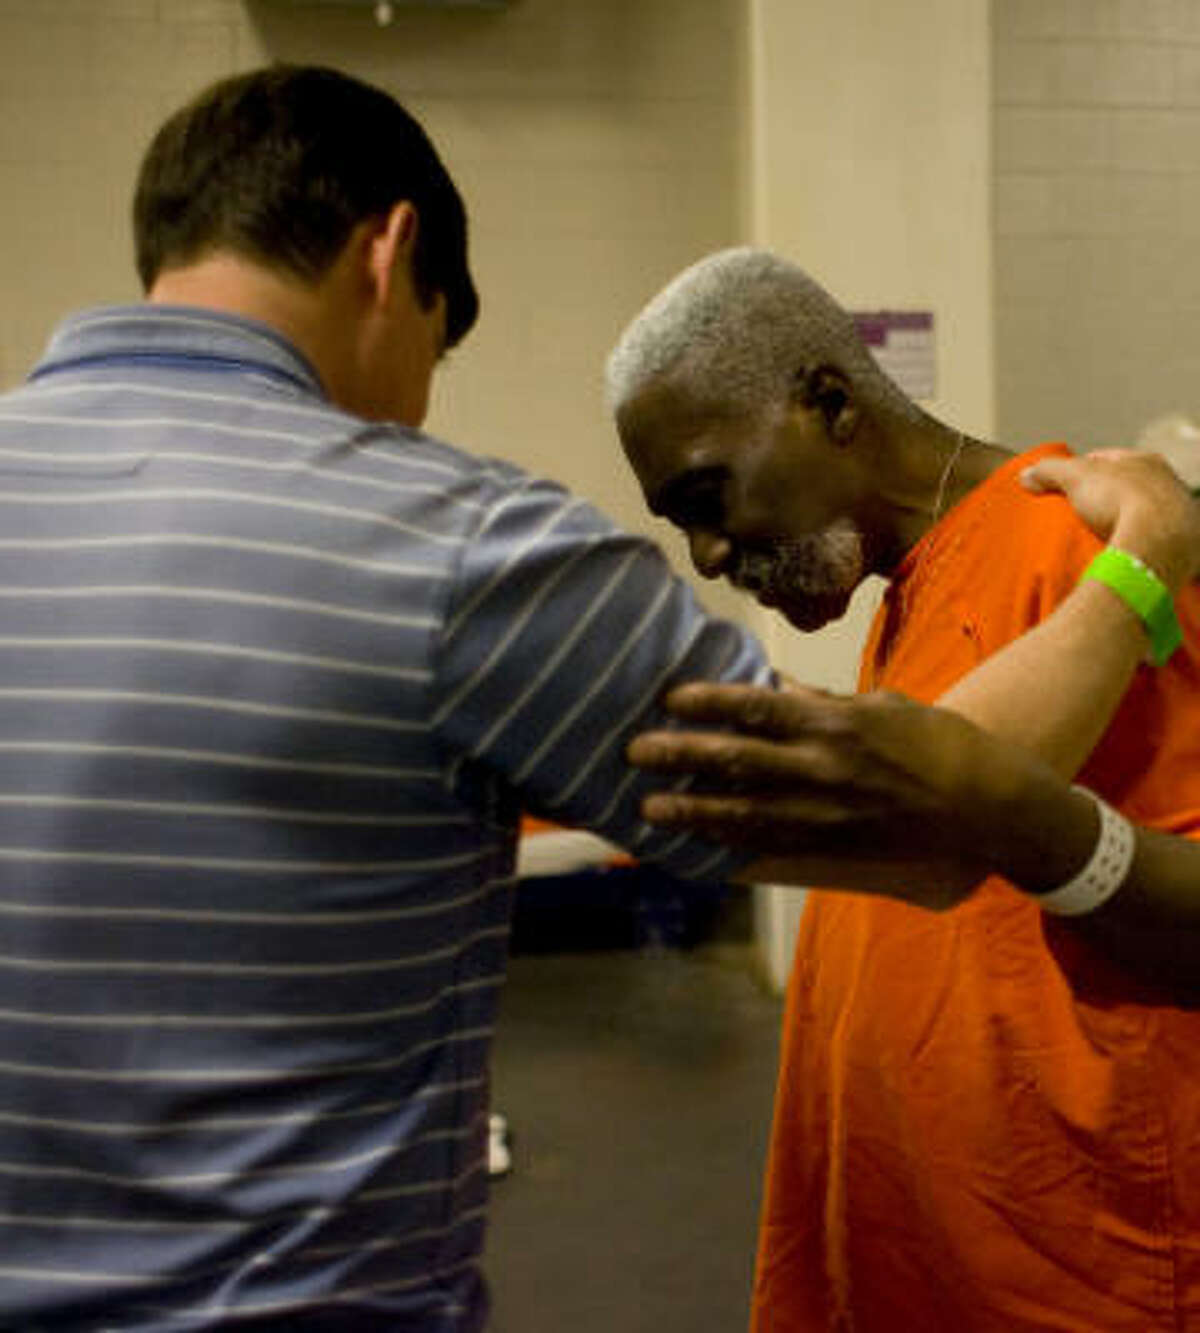 Bill Deloache Jr., one of some 300 Christian volunteers with the Pro-Claim prison ministry, prays with Donald Odom, 55, an inmate at the Harris County Jail on 1200 Baker in Houston.